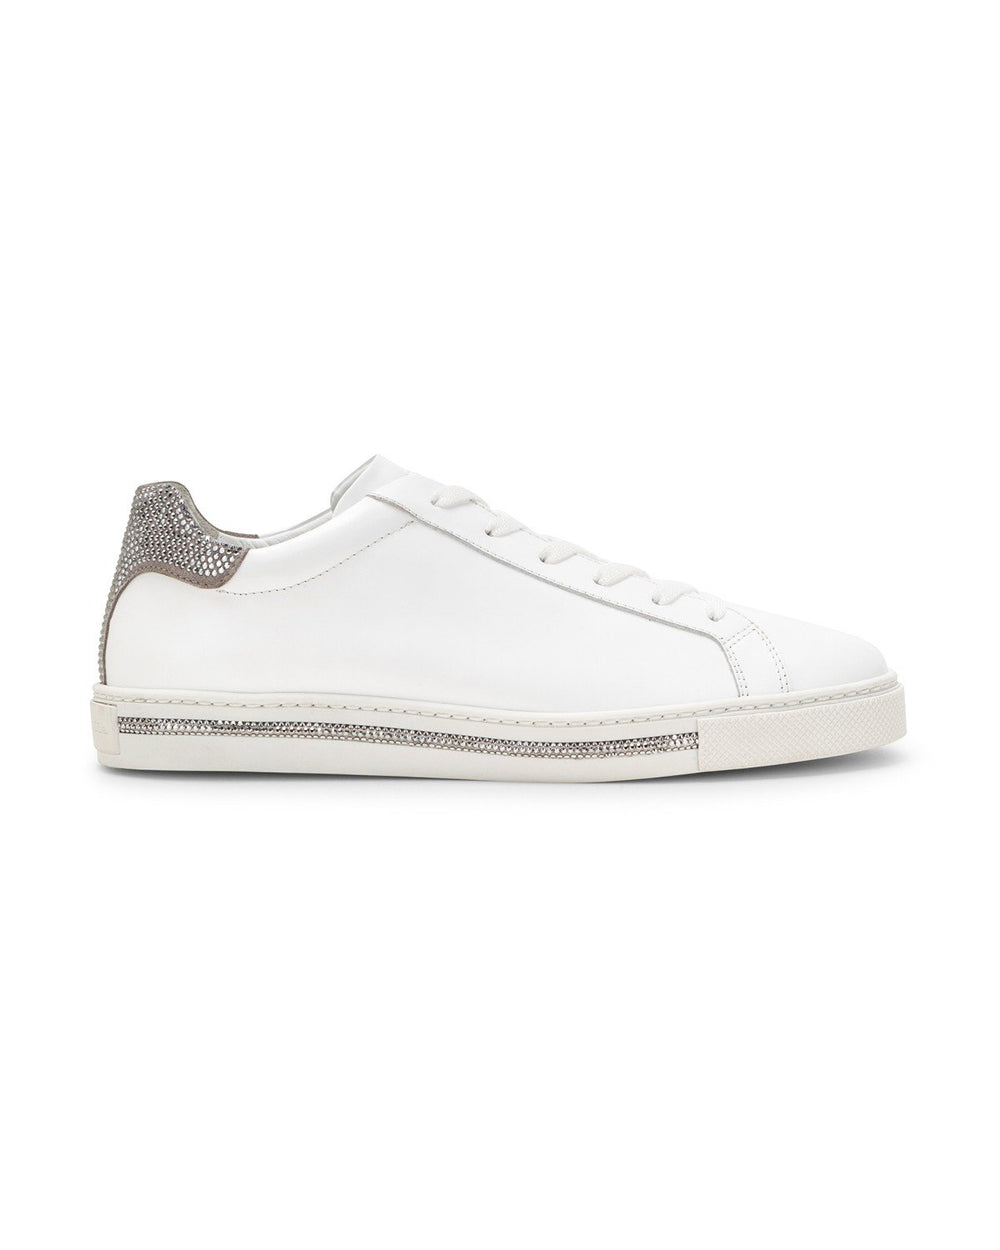 Xtra Sneakers White with Crome Contrast Strass - Rene Caovilla - Liberty Shoes Australia